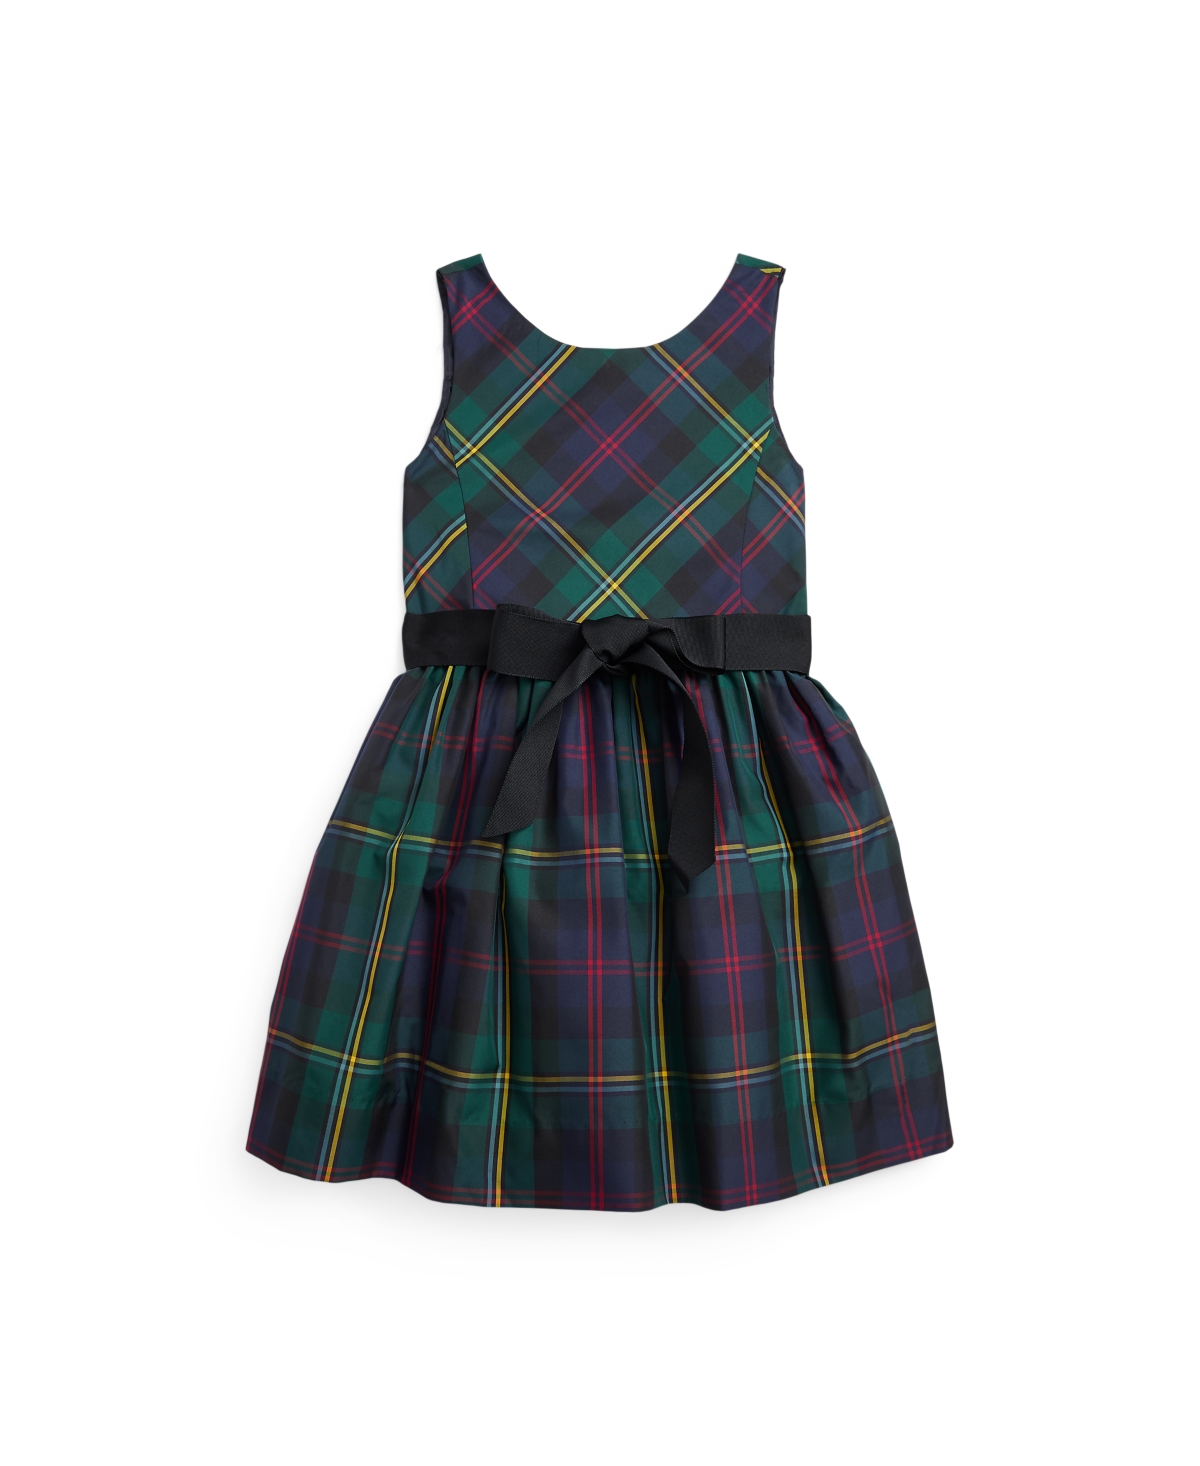 Polo Ralph Lauren Kids' Toddler And Little Girls Plaid Fit-and-flare Dress In Green-black Multi